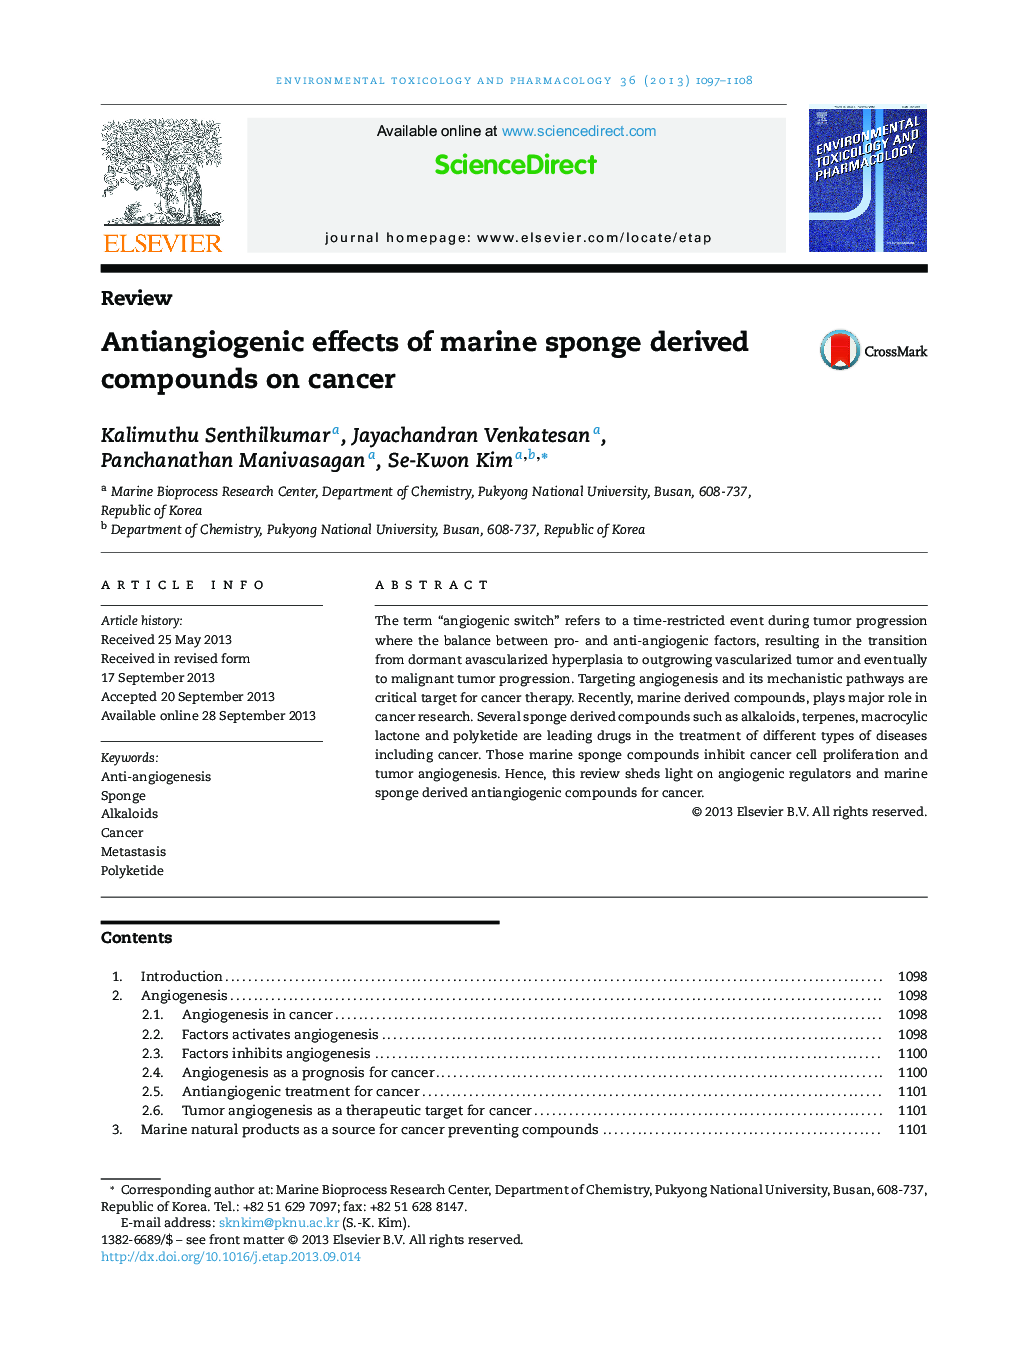 Antiangiogenic effects of marine sponge derived compounds on cancer